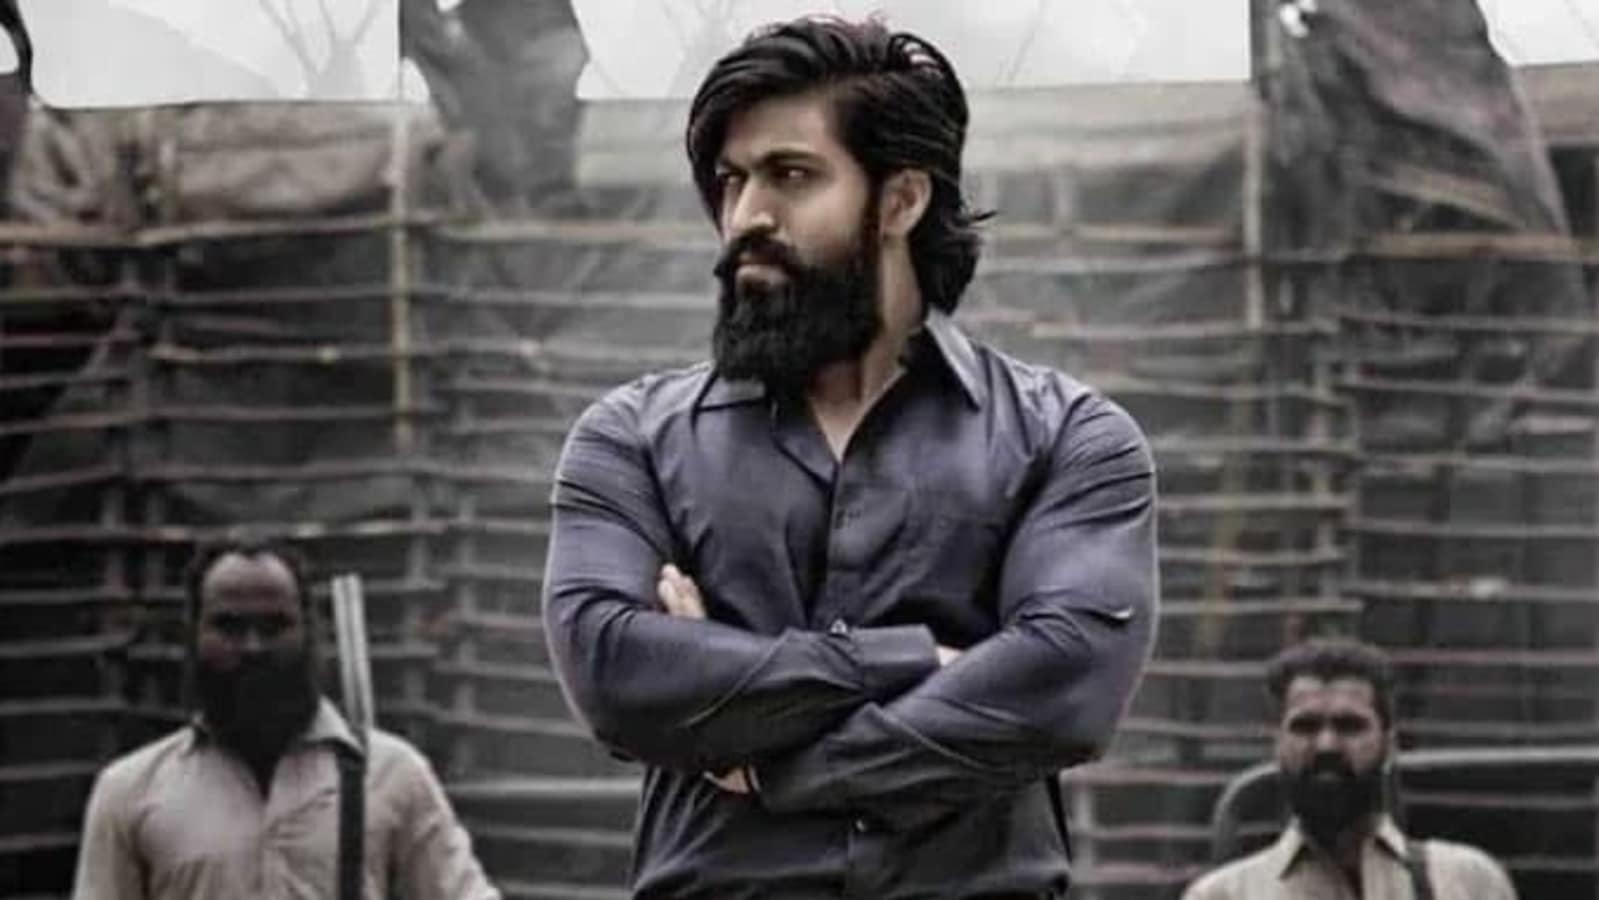 Cine lovers are waiting for the news KGF 3 will be started by the producer